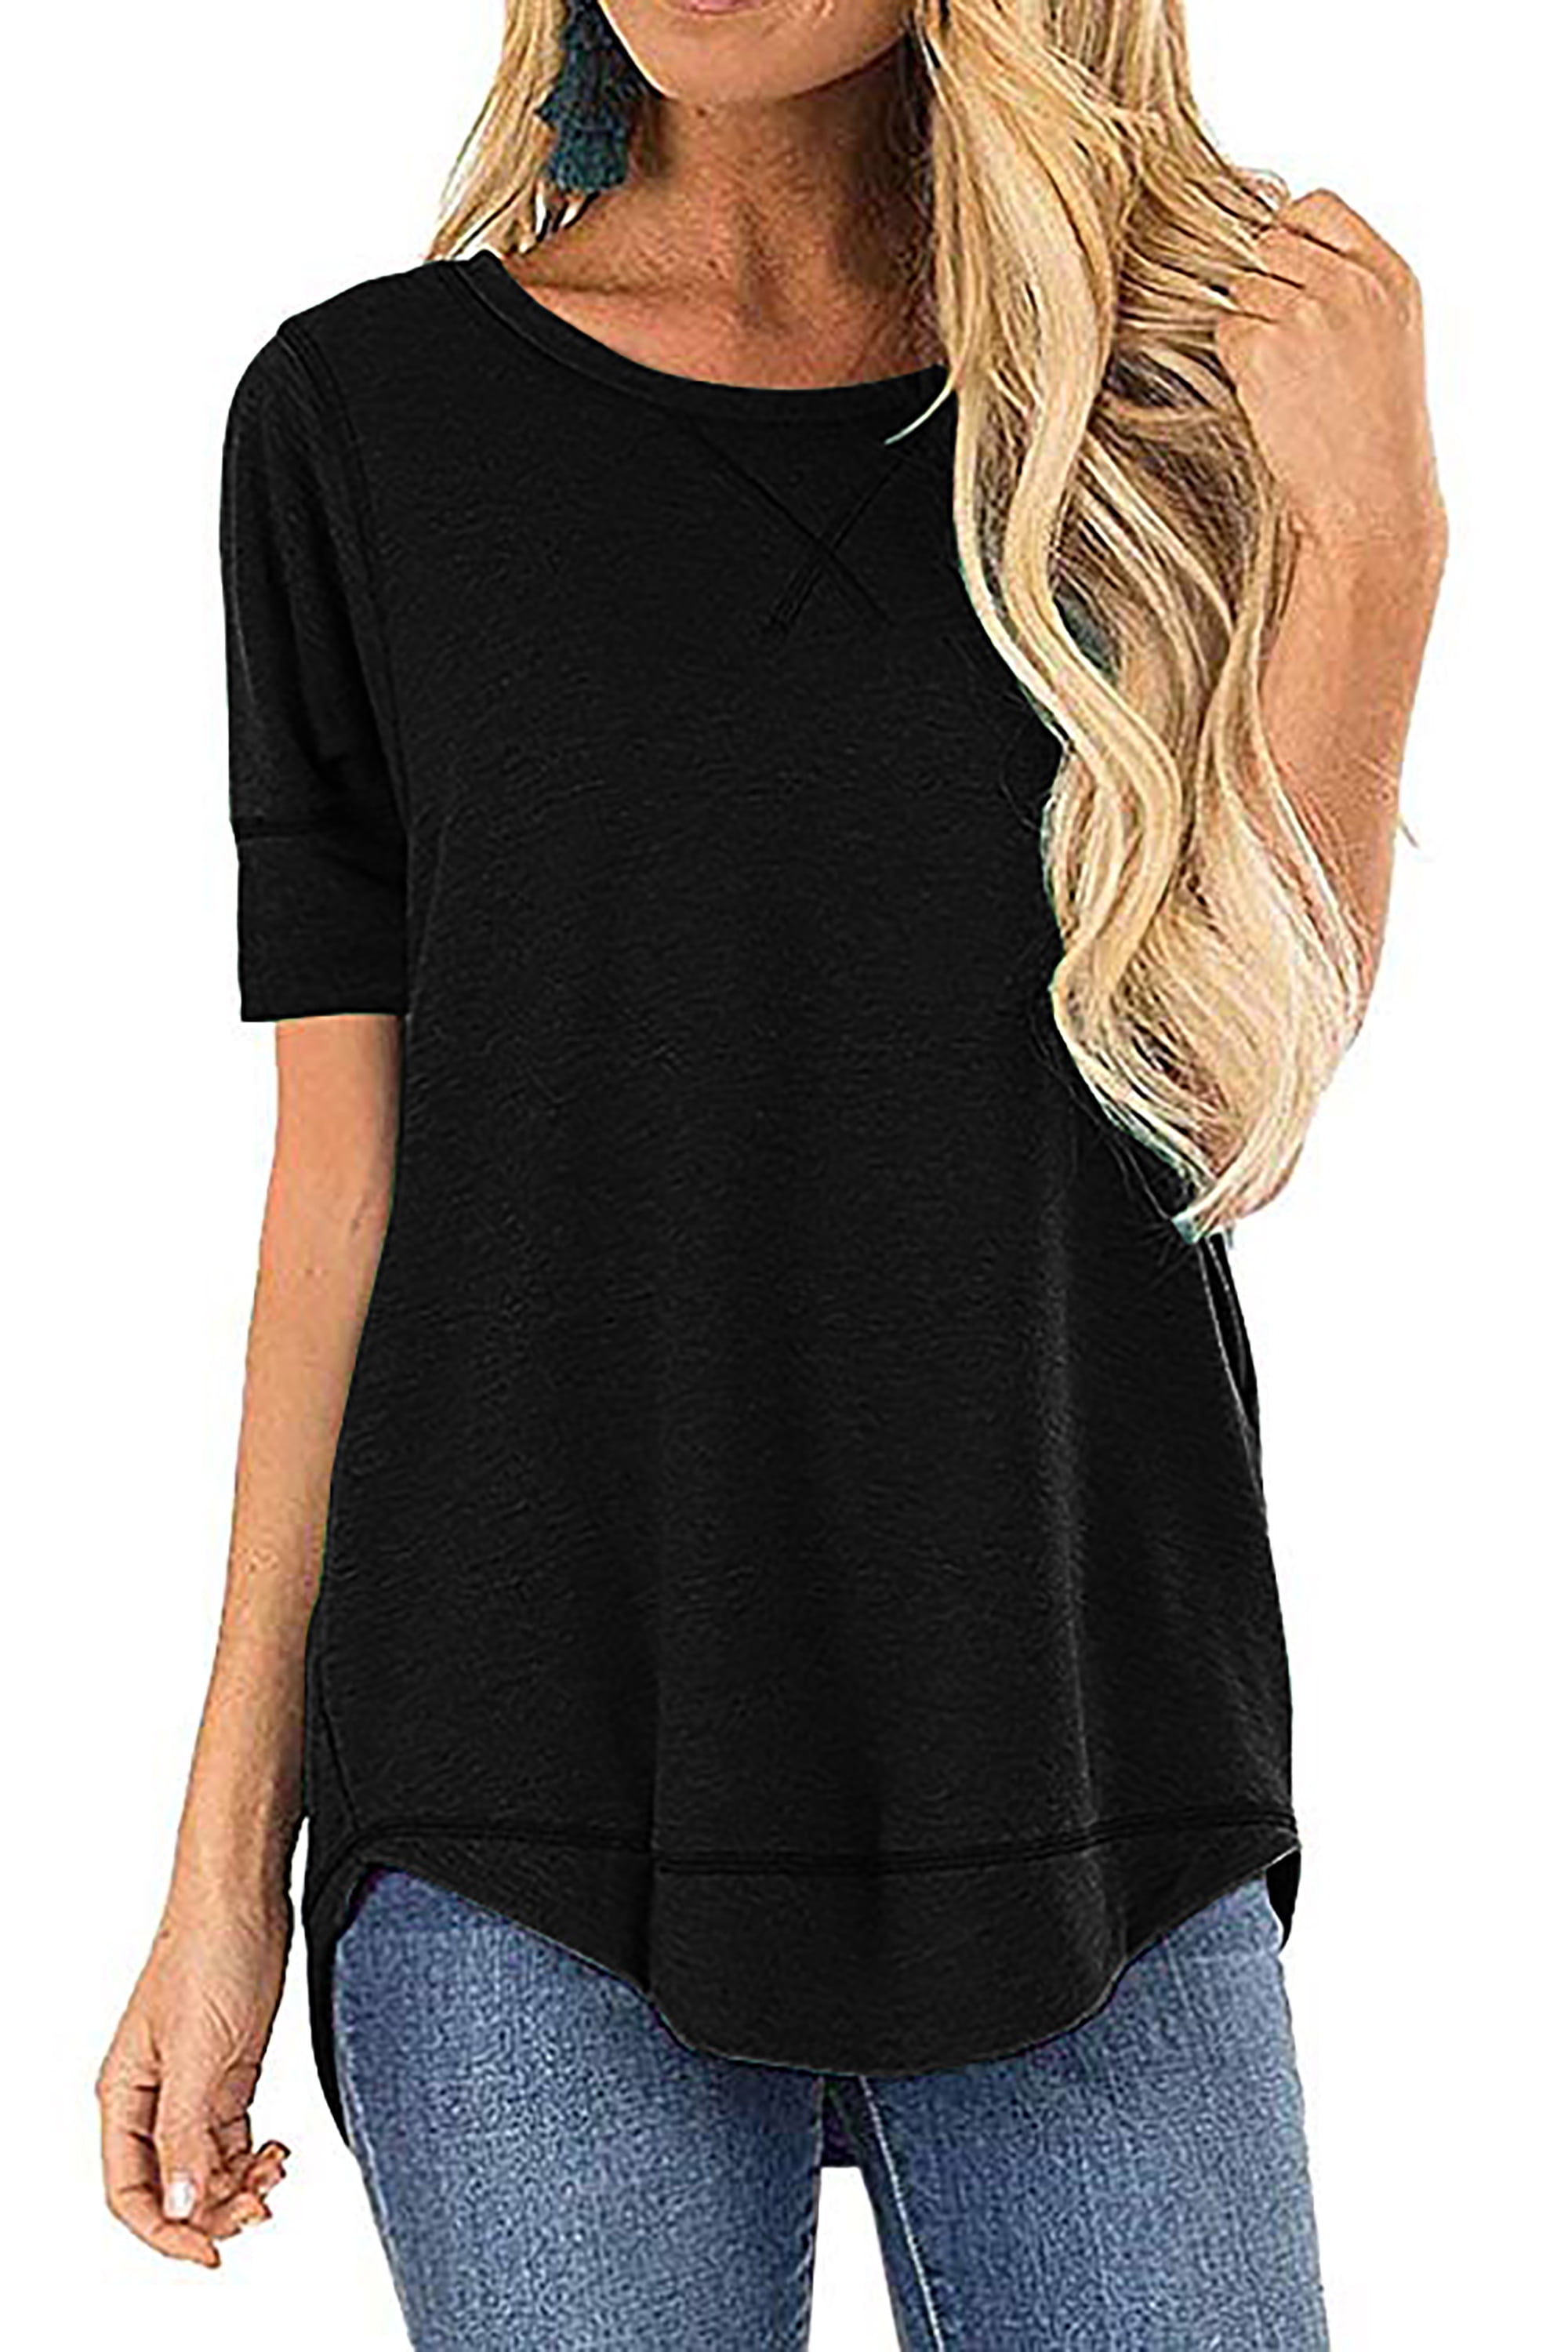 Famulily Summer Womens Tshirts Casual Soft Simple Plain Cotton Short Sleeve Tops S-2XL